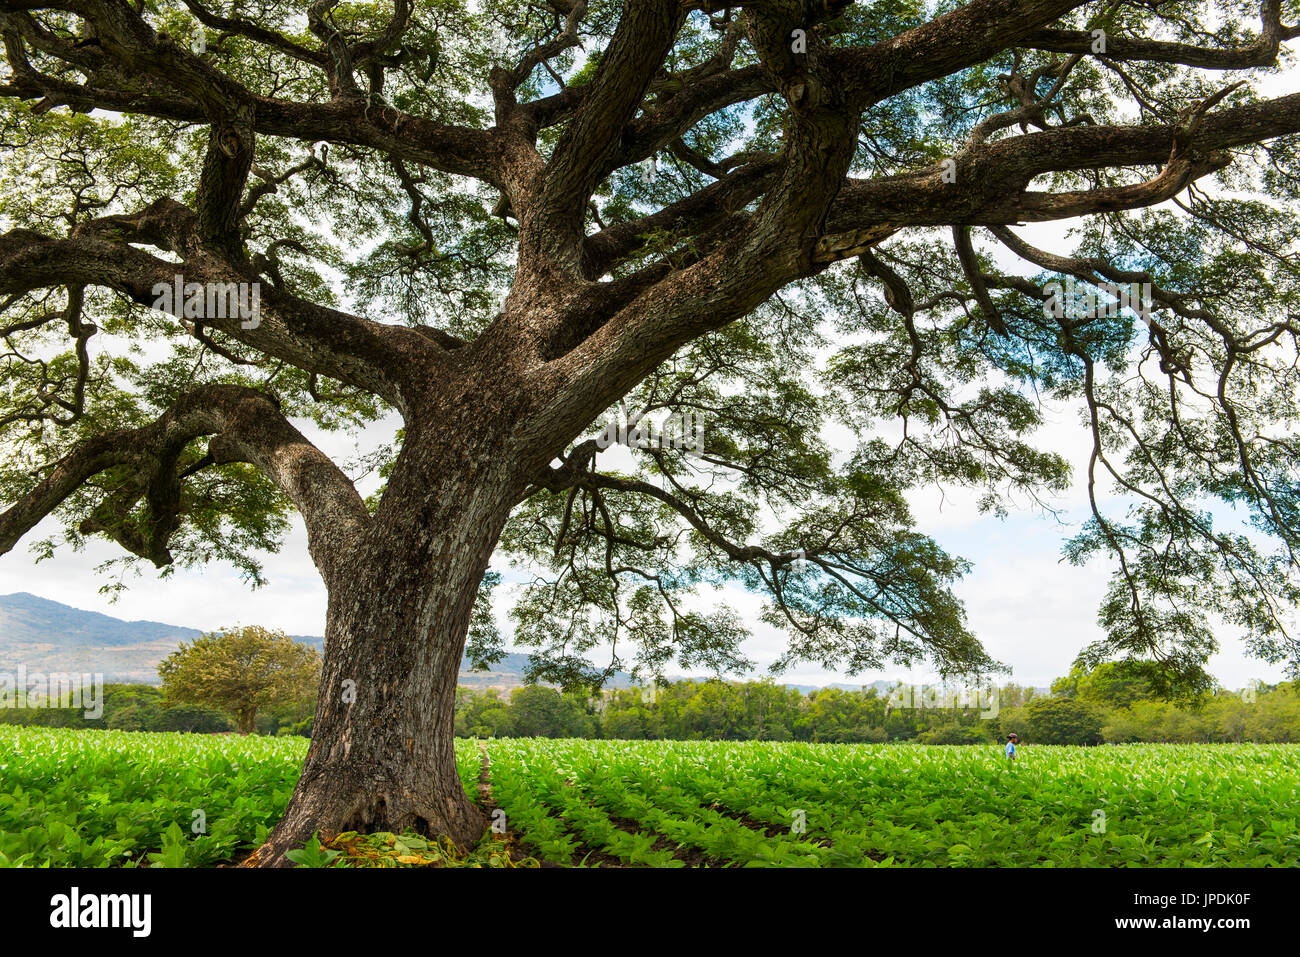 Old tree in a field with tobacco plants, cultivation of tobacco, Esteli, Nicaragua Stock Photo